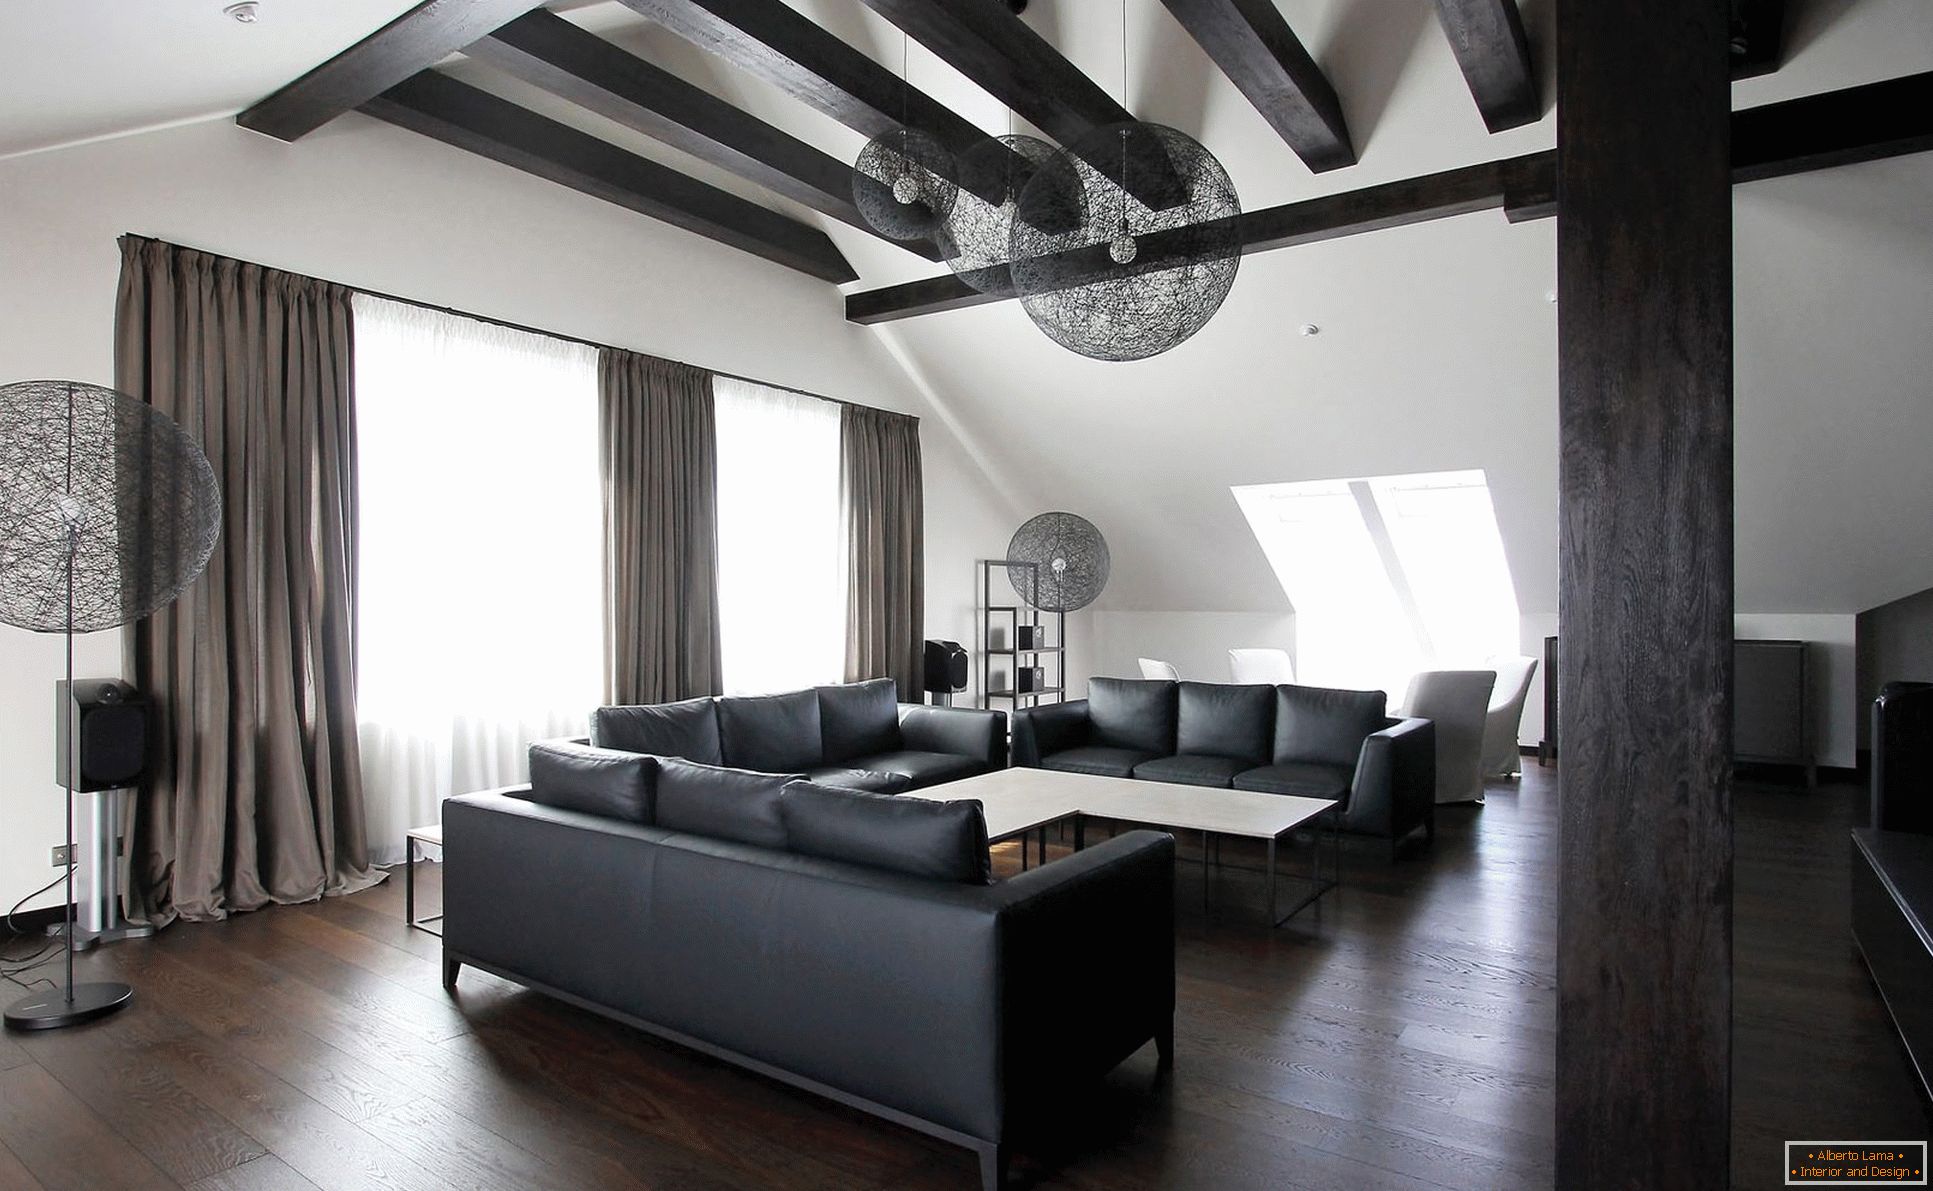 Black beams on the ceiling in the interior of the living room